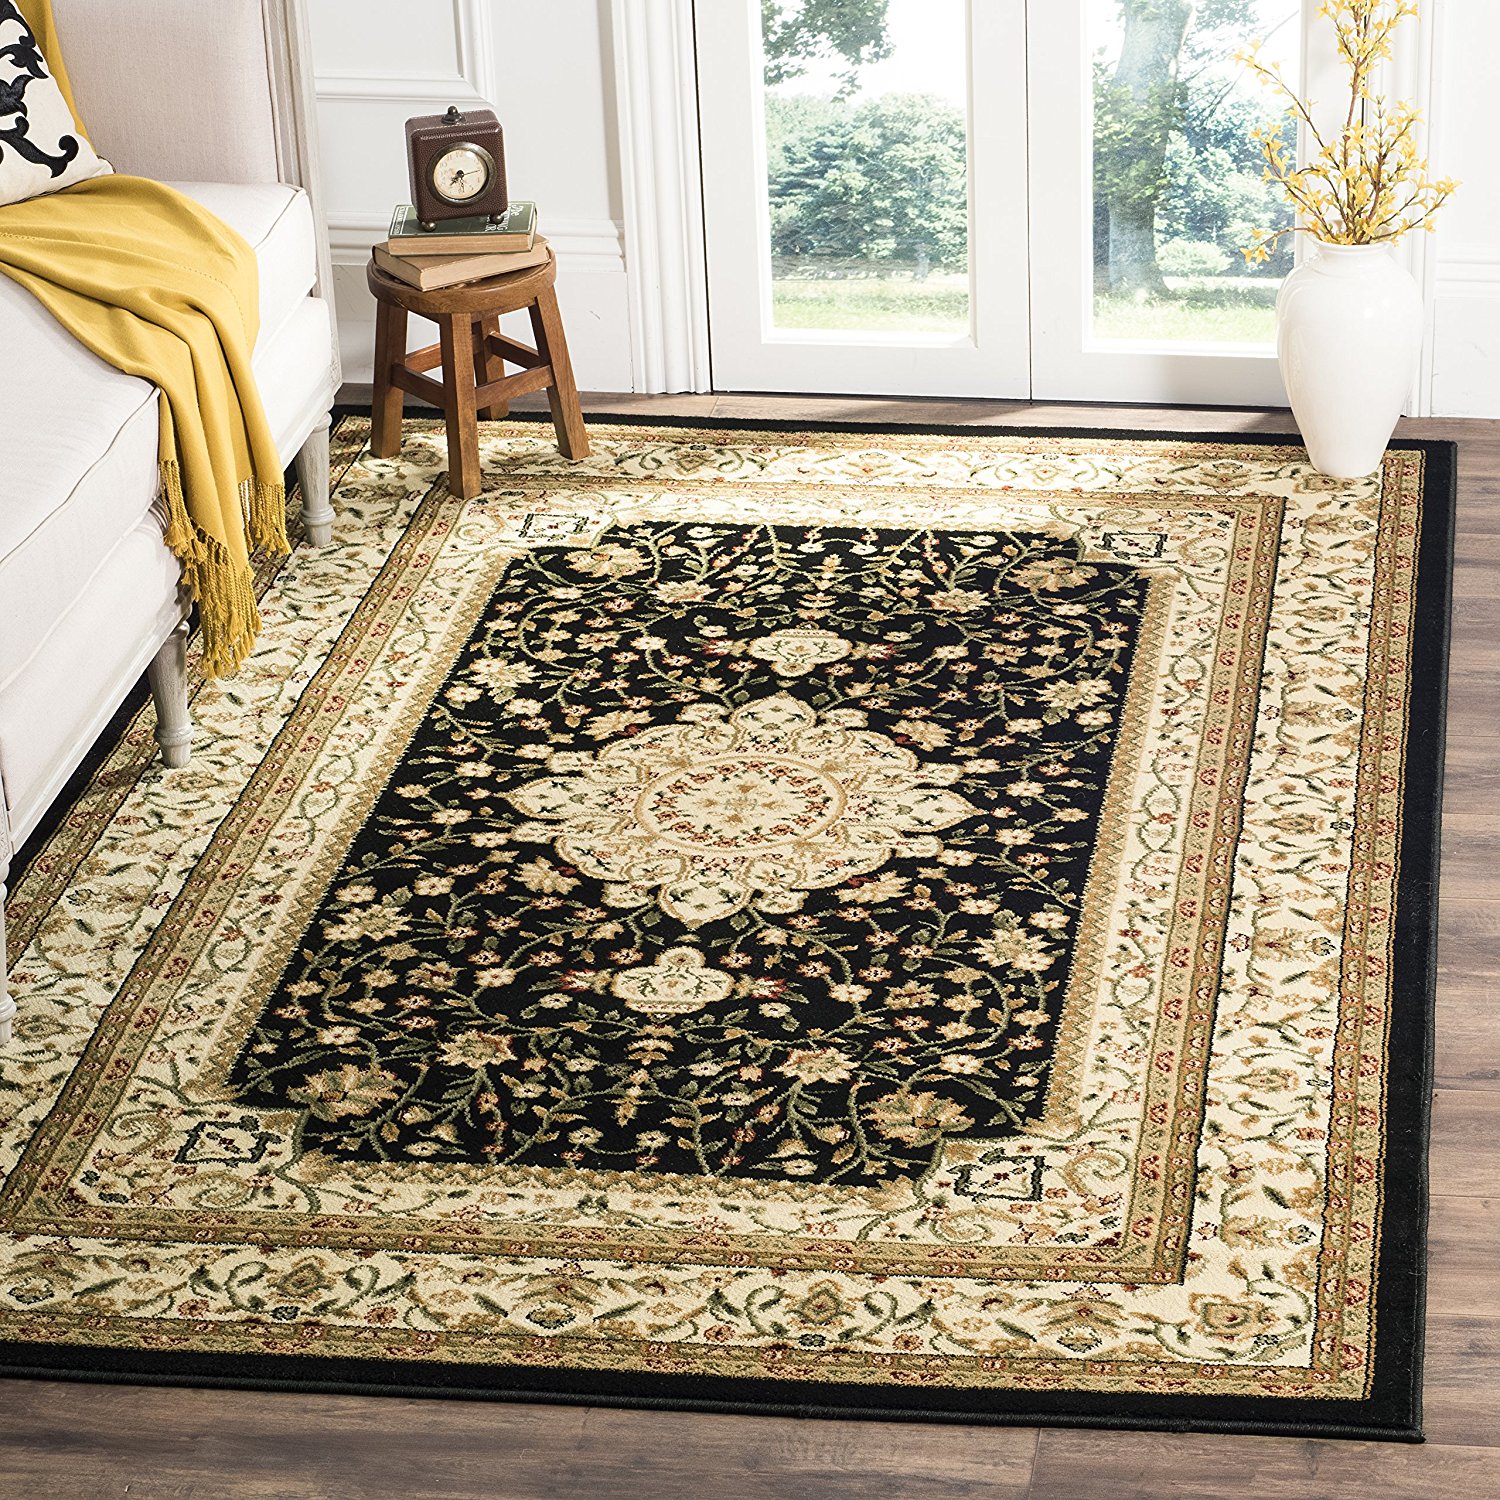 Safavieh Lyndhurst Collection LNH213A Traditional Oriental Medallion Black and Ivory Square Area Rug (8' Square)